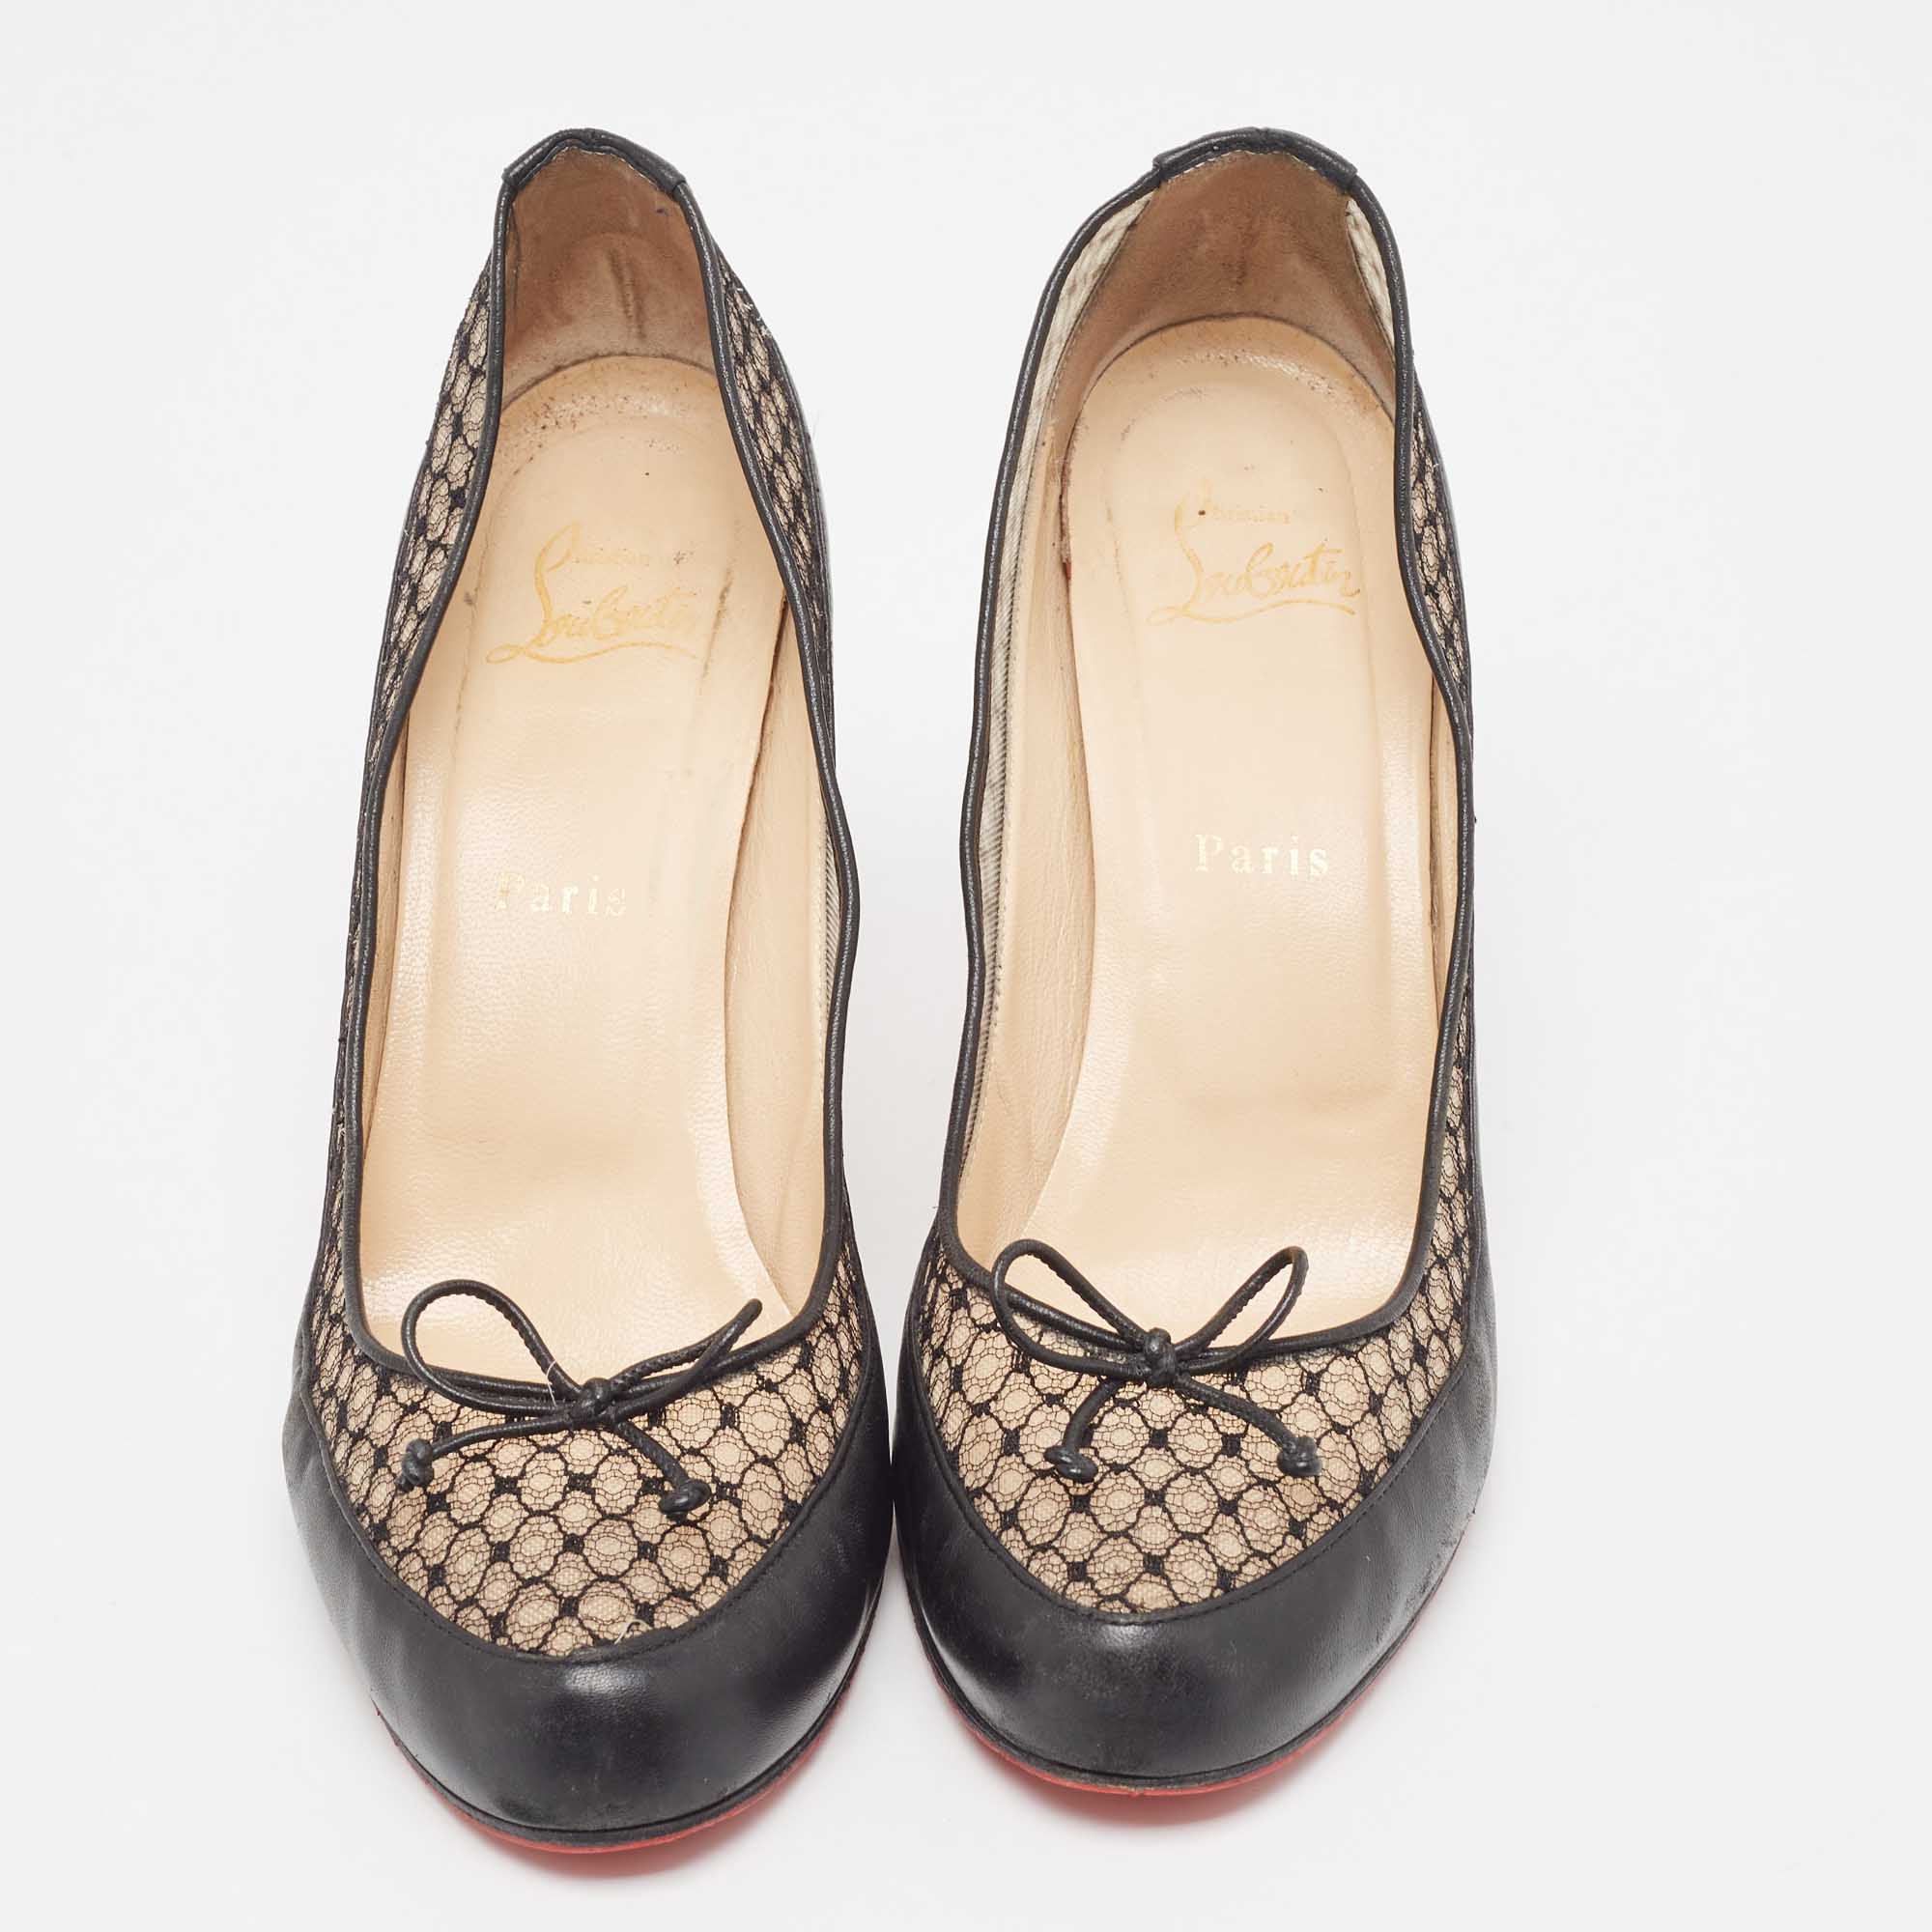 Christian Louboutin Black Leather And Lace Bow Pumps Size 40.5